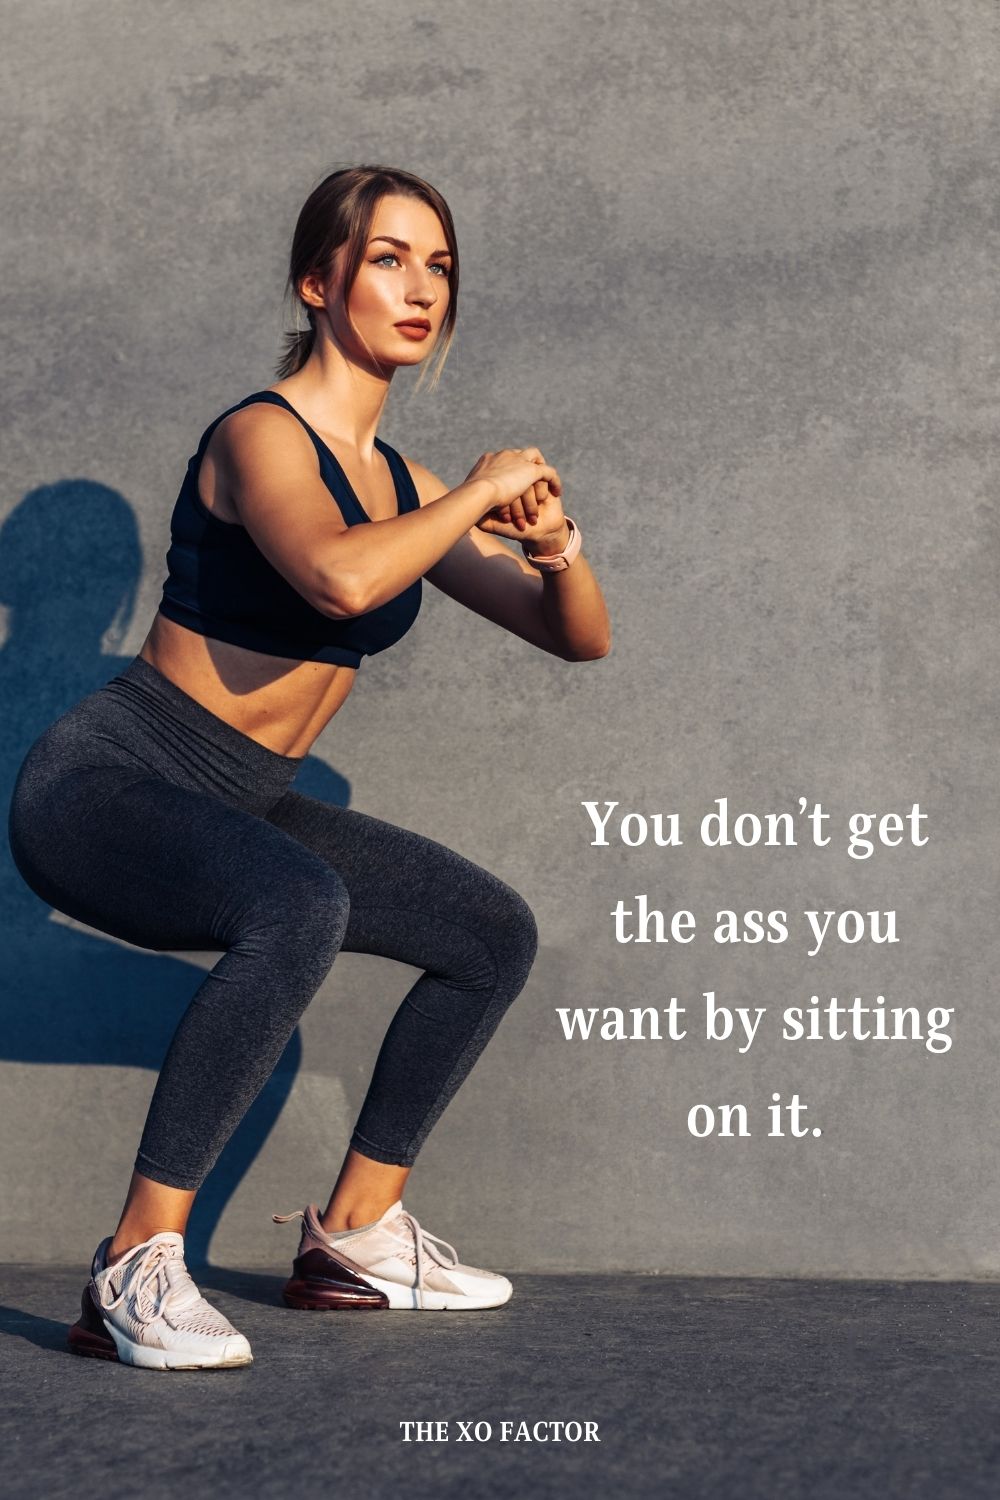 You don’t get the ass you want by sitting on it.